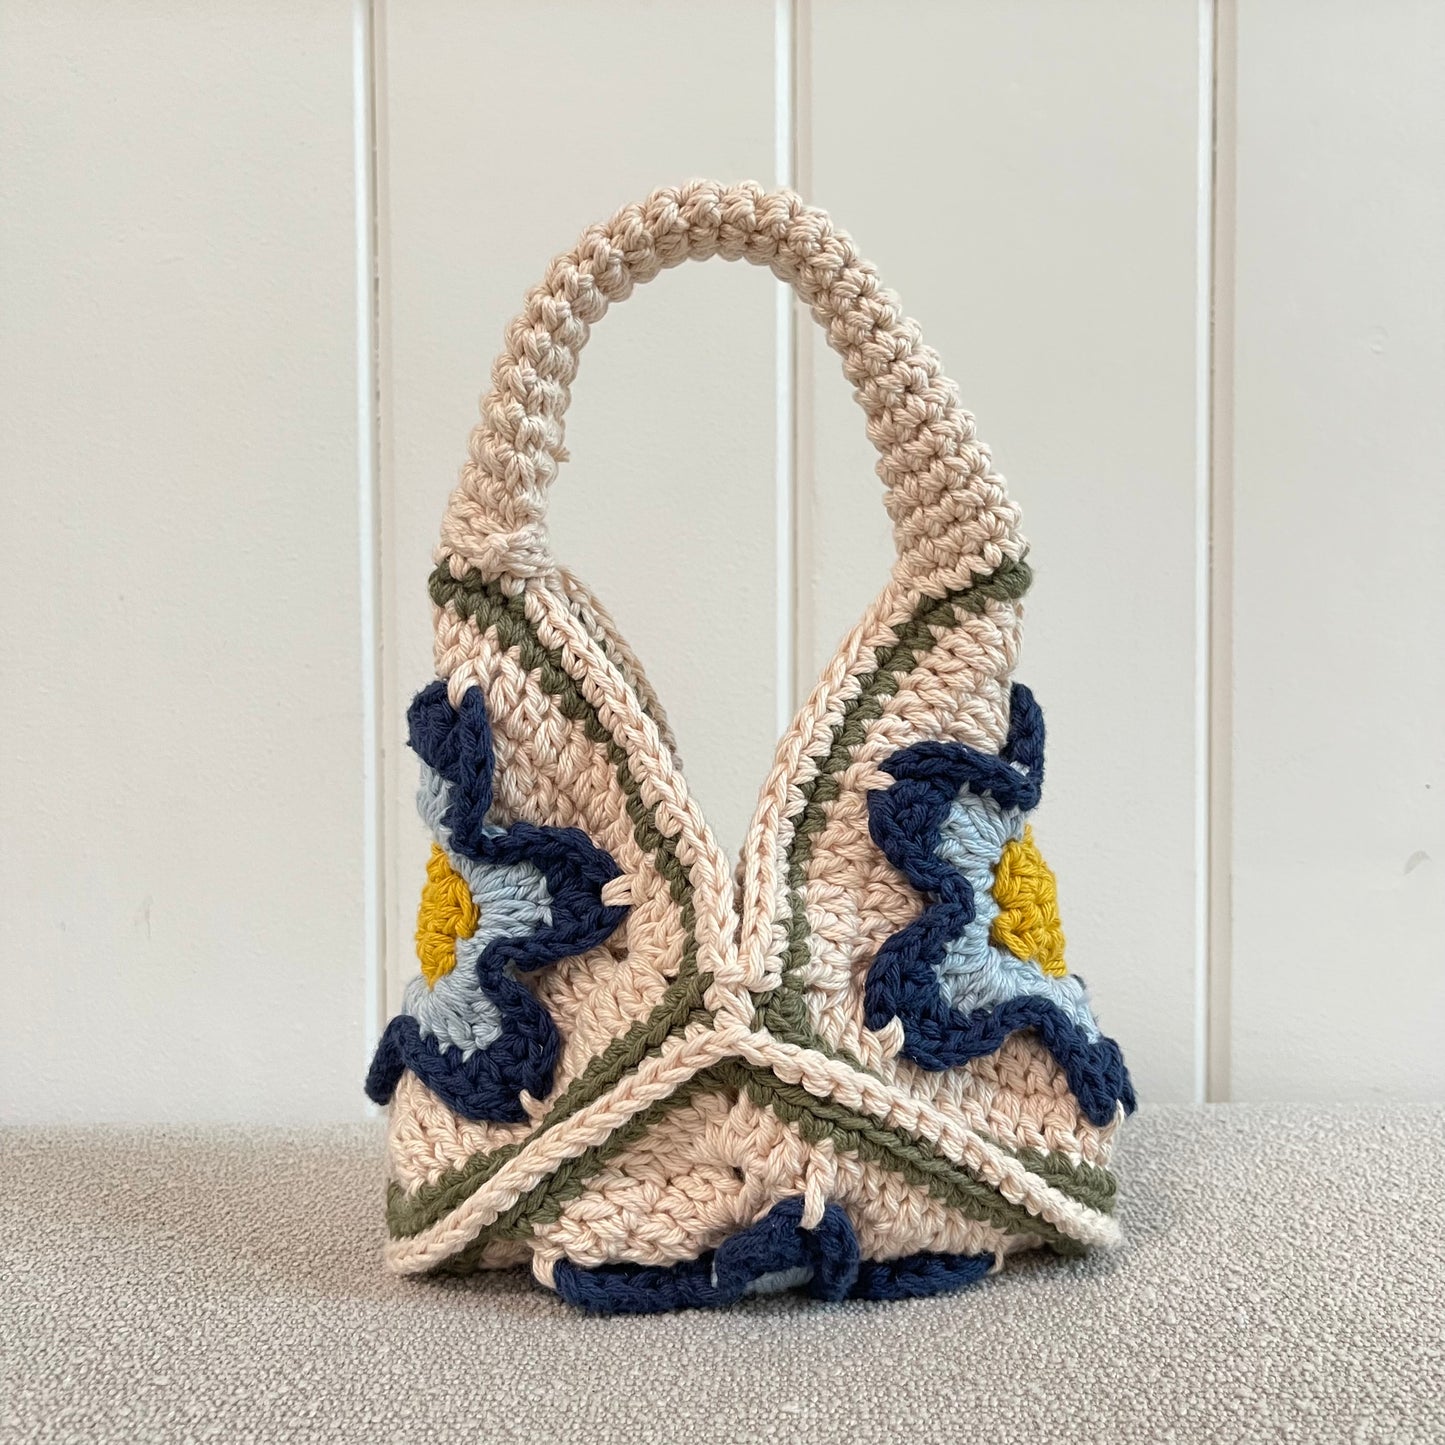 A crocheted handbag in cream, yellow, baby blue and navy blue. 